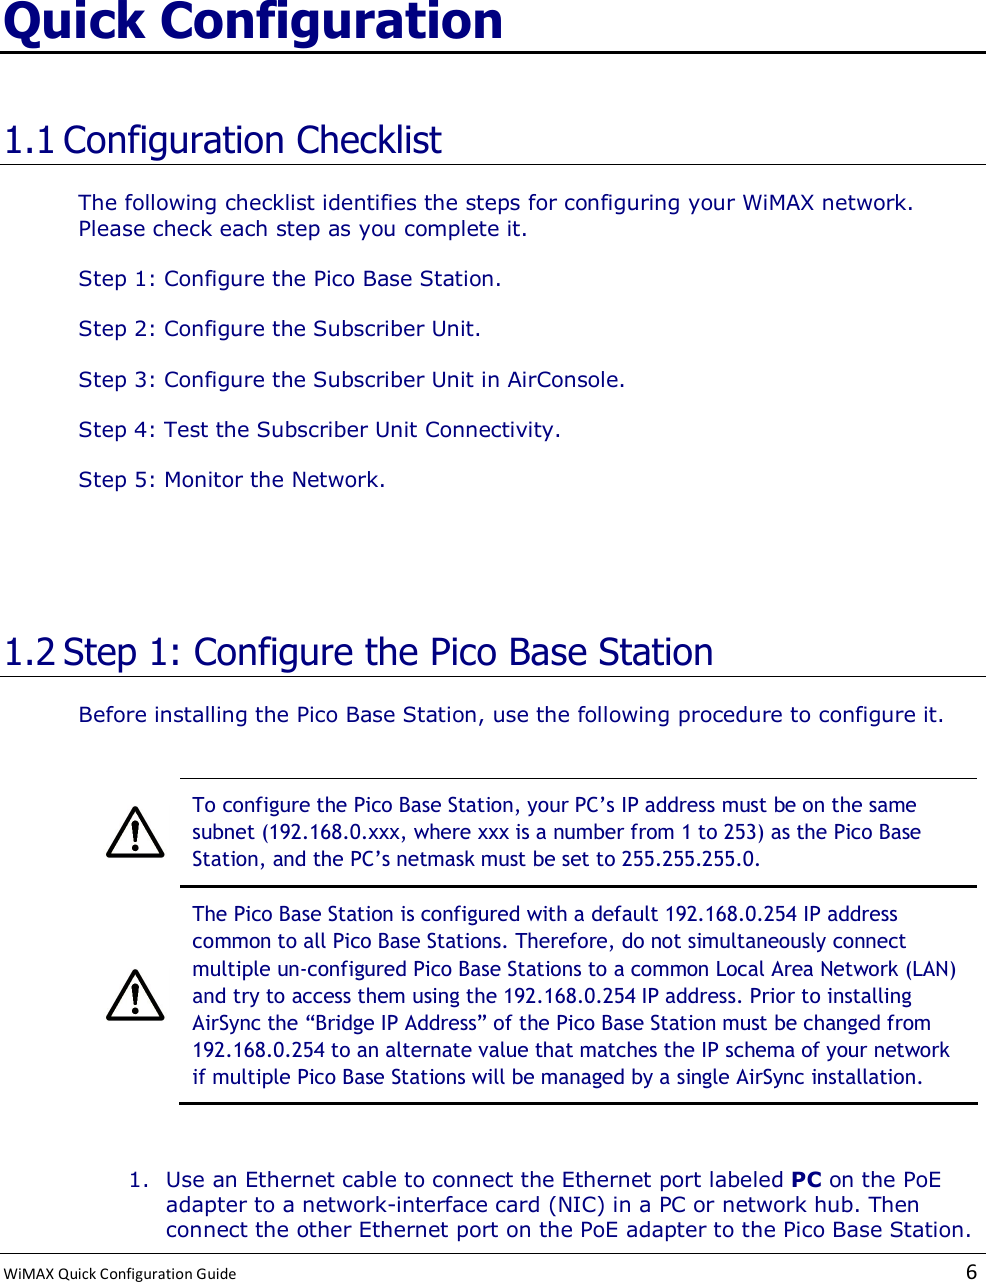  WiMAX Quick Configuration Guide   6    Quick Configuration 1.1 Configuration Checklist The following checklist identifies the steps for configuring your WiMAX network. Please check each step as you complete it. Step 1: Configure the Pico Base Station. Step 2: Configure the Subscriber Unit. Step 3: Configure the Subscriber Unit in AirConsole. Step 4: Test the Subscriber Unit Connectivity. Step 5: Monitor the Network.   1.2 Step 1: Configure the Pico Base Station Before installing the Pico Base Station, use the following procedure to configure it.   To configure the Pico Base Station, your PC’s IP address must be on the same subnet (192.168.0.xxx, where xxx is a number from 1 to 253) as the Pico Base Station, and the PC’s netmask must be set to 255.255.255.0.  The Pico Base Station is configured with a default 192.168.0.254 IP address common to all Pico Base Stations. Therefore, do not simultaneously connect multiple un-configured Pico Base Stations to a common Local Area Network (LAN) and try to access them using the 192.168.0.254 IP address. Prior to installing AirSync the “Bridge IP Address” of the Pico Base Station must be changed from 192.168.0.254 to an alternate value that matches the IP schema of your network if multiple Pico Base Stations will be managed by a single AirSync installation.  1. Use an Ethernet cable to connect the Ethernet port labeled PC on the PoE adapter to a network-interface card (NIC) in a PC or network hub. Then connect the other Ethernet port on the PoE adapter to the Pico Base Station. 